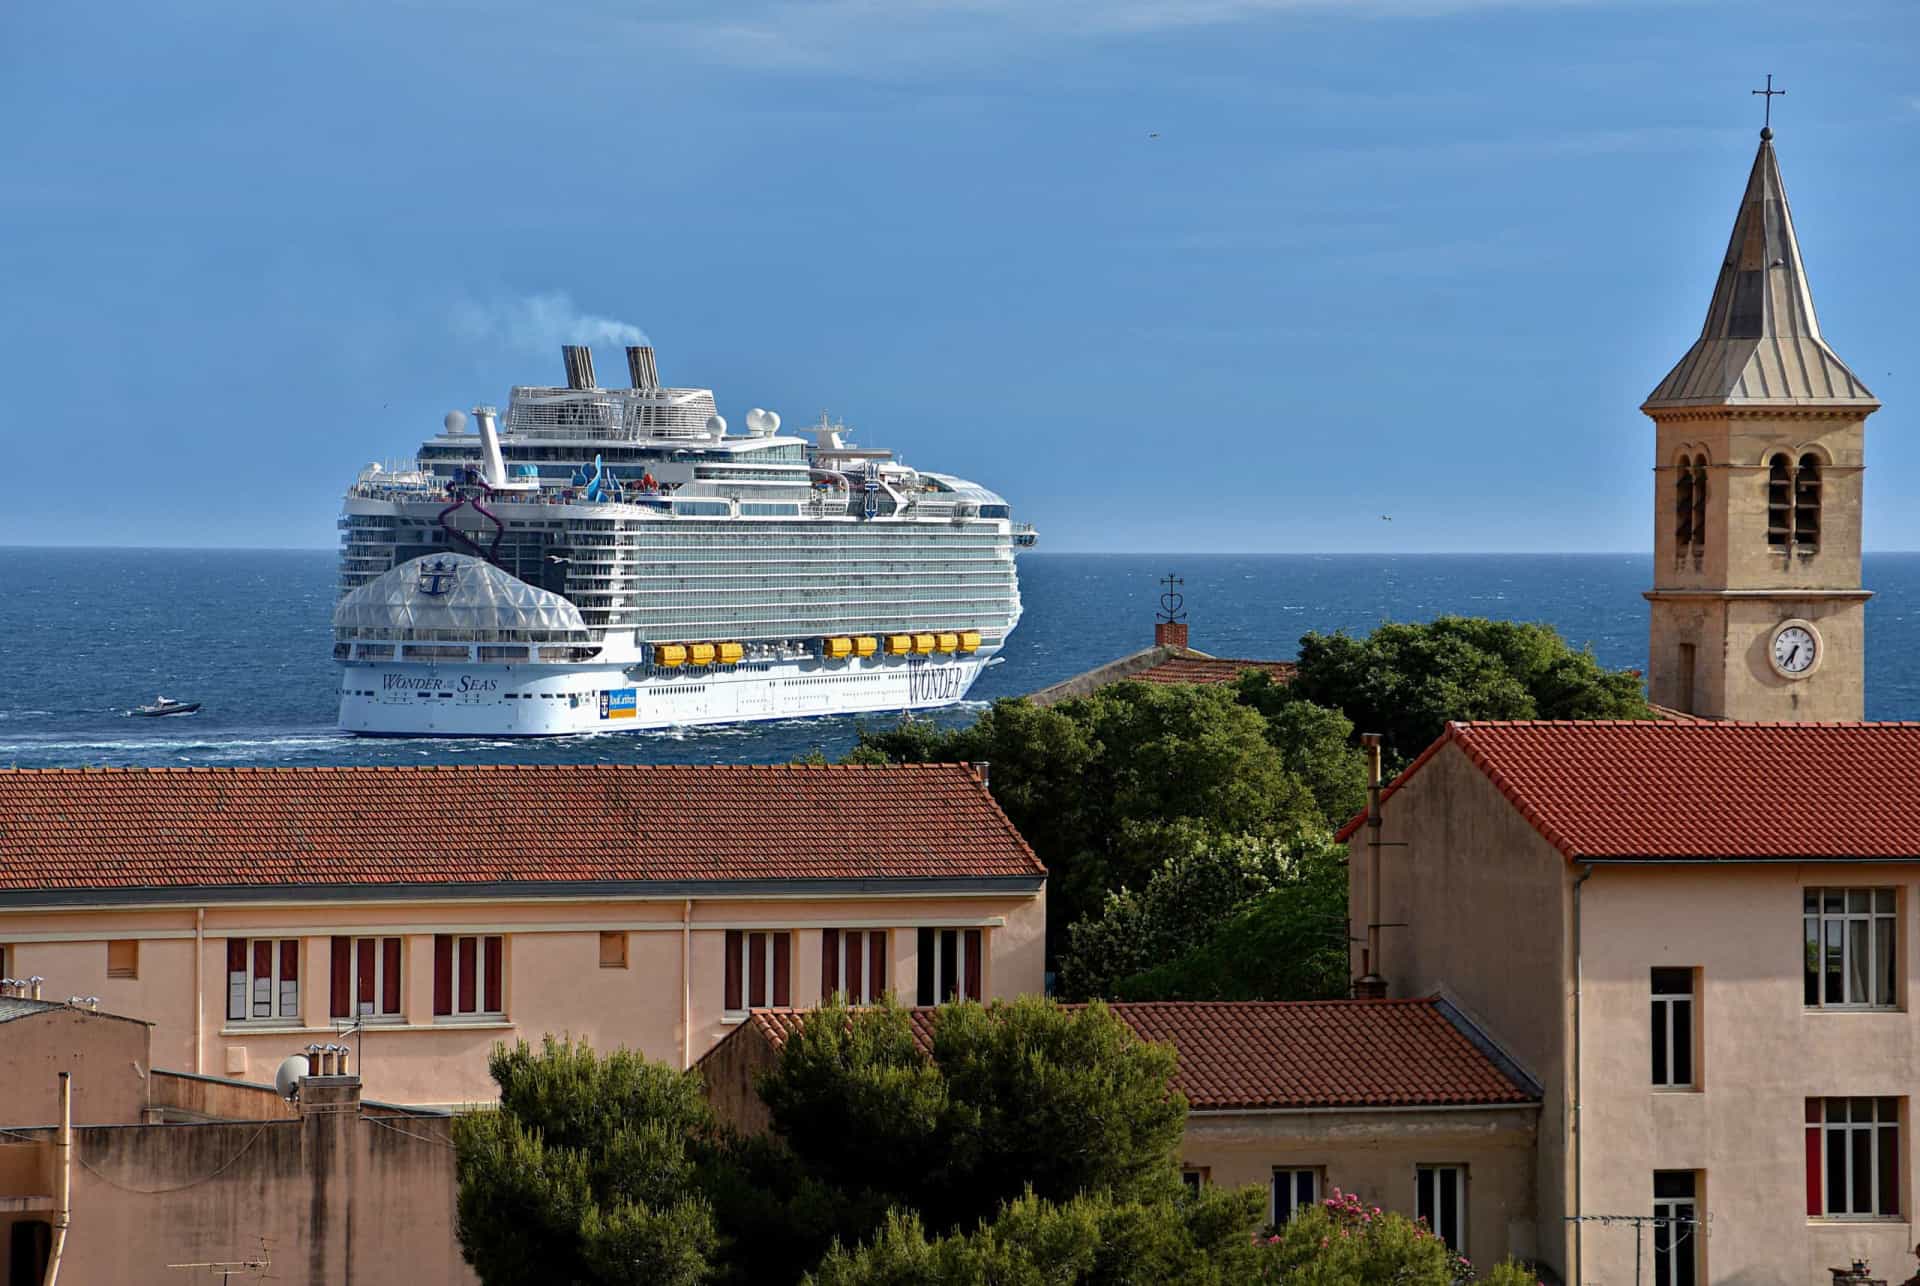 <p>Currently, the largest cruise ship in the world is <em>Wonder of the Seas</em> (pictured in May 2022 leaving Marseilles). This vast floating hotel can accommodate 6,988 passengers. Operated by Royal Caribbean International, the vessel is longer than the largest military ships ever built, the US <em>Nimitz</em>-class aircraft carriers.</p> <p>Sources: (Cruise Market Watch) (Cruise Dialysis) (Smithsonian Magazine) (History) (The Maritime Executive) (Forbes)</p> <p>See also: <a href="https://www.starsinsider.com/lifestyle/402795/10000-eggs-per-day-and-other-crazy-cruise-ship-food-stats">10,000 eggs a day and other crazy cruise ship food stats</a></p><p><a href="https://www.msn.com/en-za/community/channel/vid-7xx8mnucu55yw63we9va2gwr7uihbxwc68fxqp25x6tg4ftibpra?cvid=94631541bc0f4f89bfd59158d696ad7e">Follow us and access great exclusive content every day</a></p>